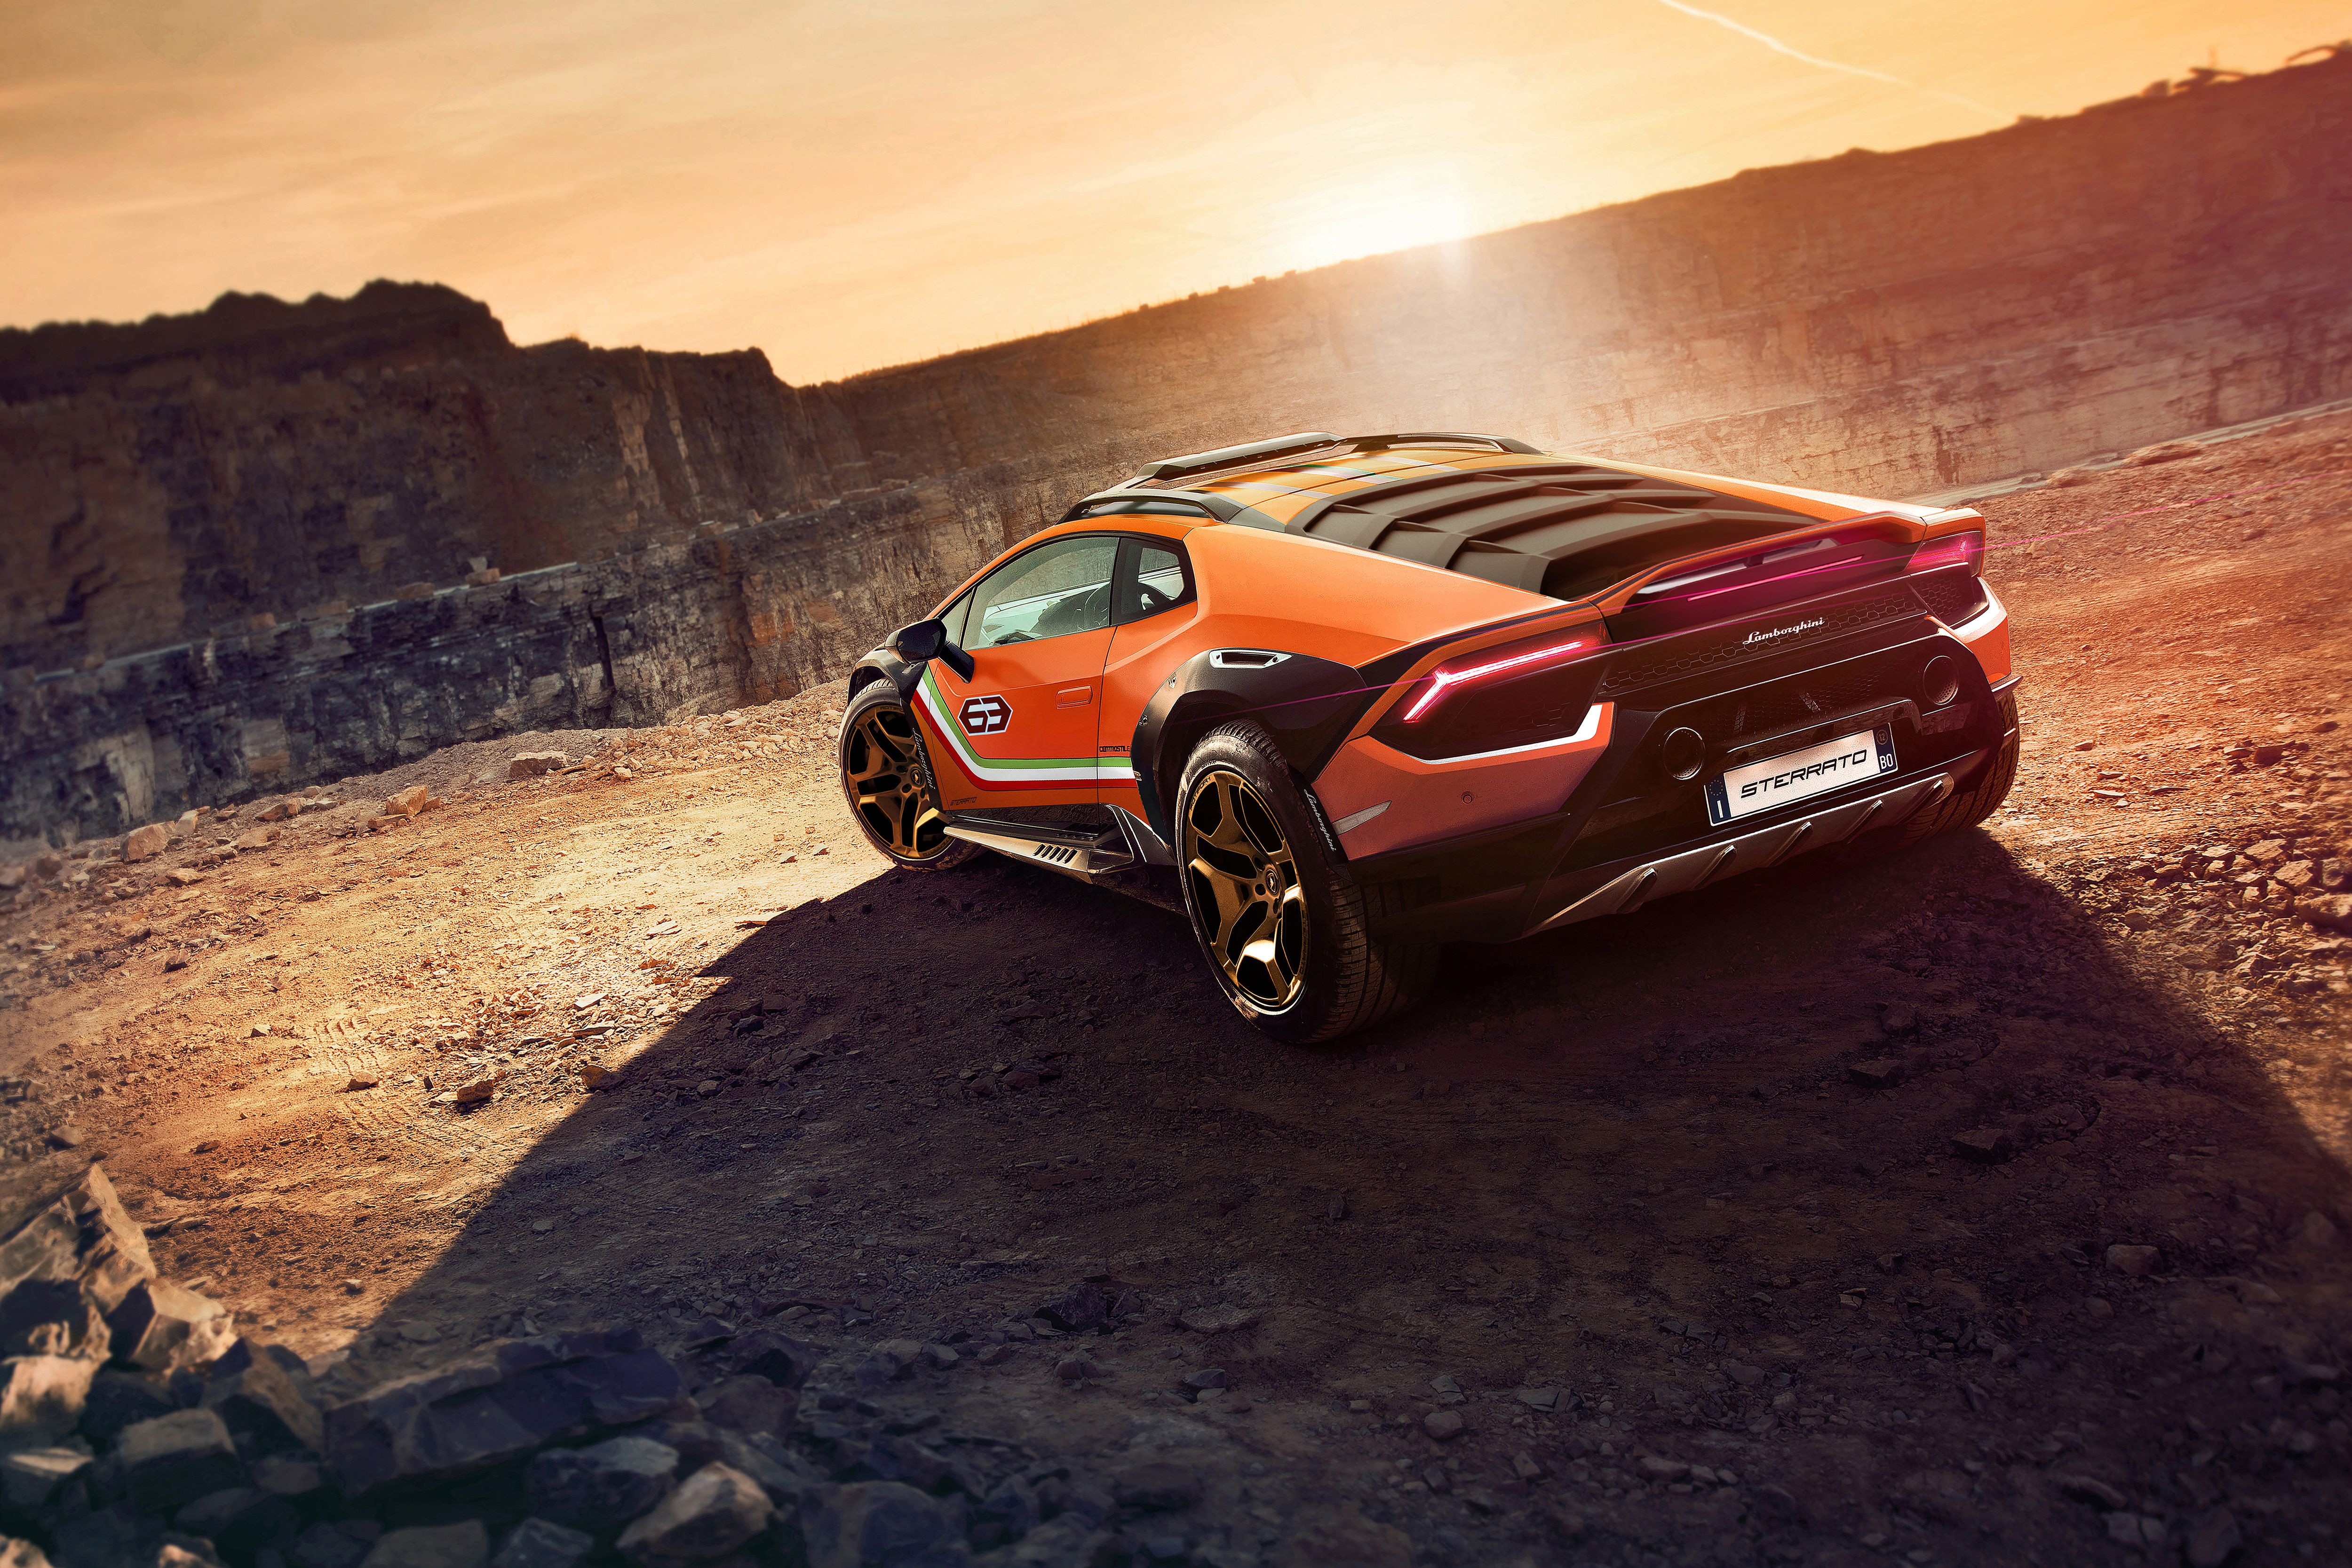 2022 Everything You Need to Know About the Off-Road Lamborghini Huracan Sterrato 